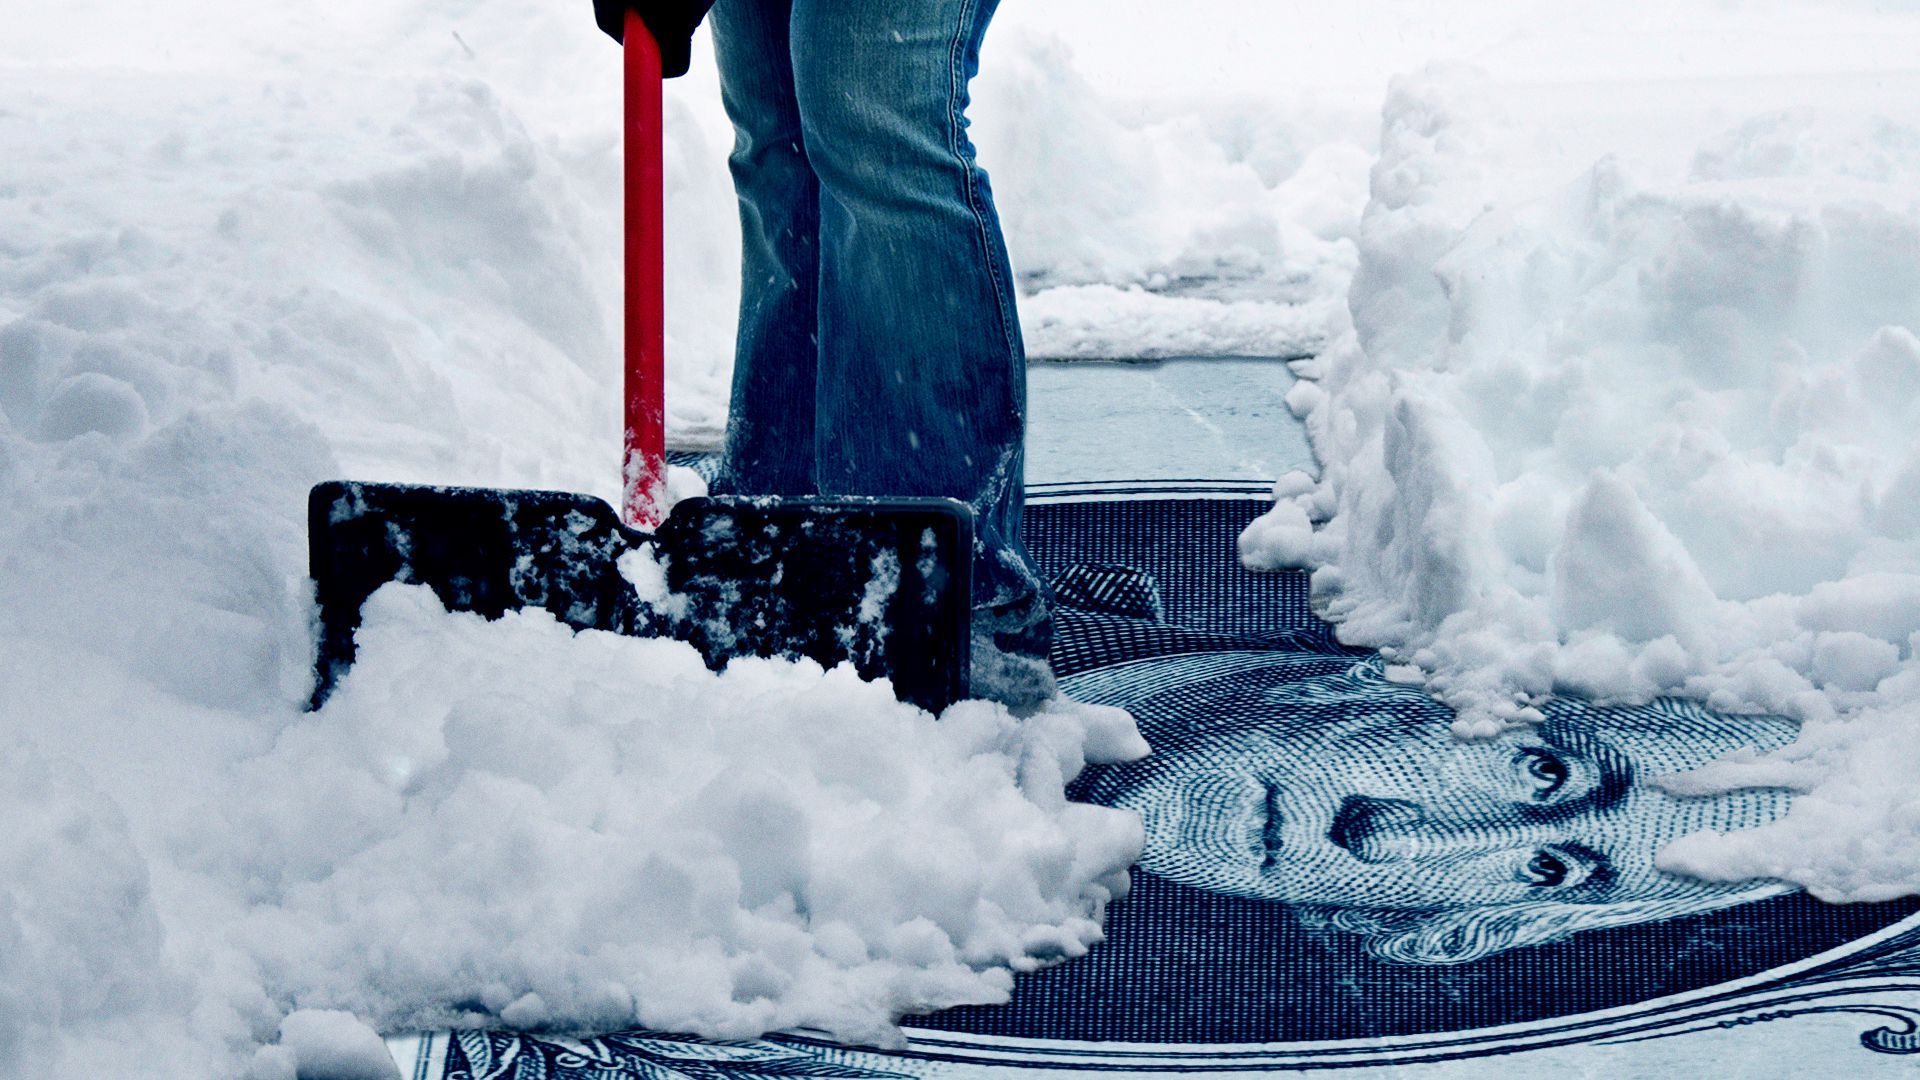 Illustration of a person shoveling snow, which reveals a dollar bill.